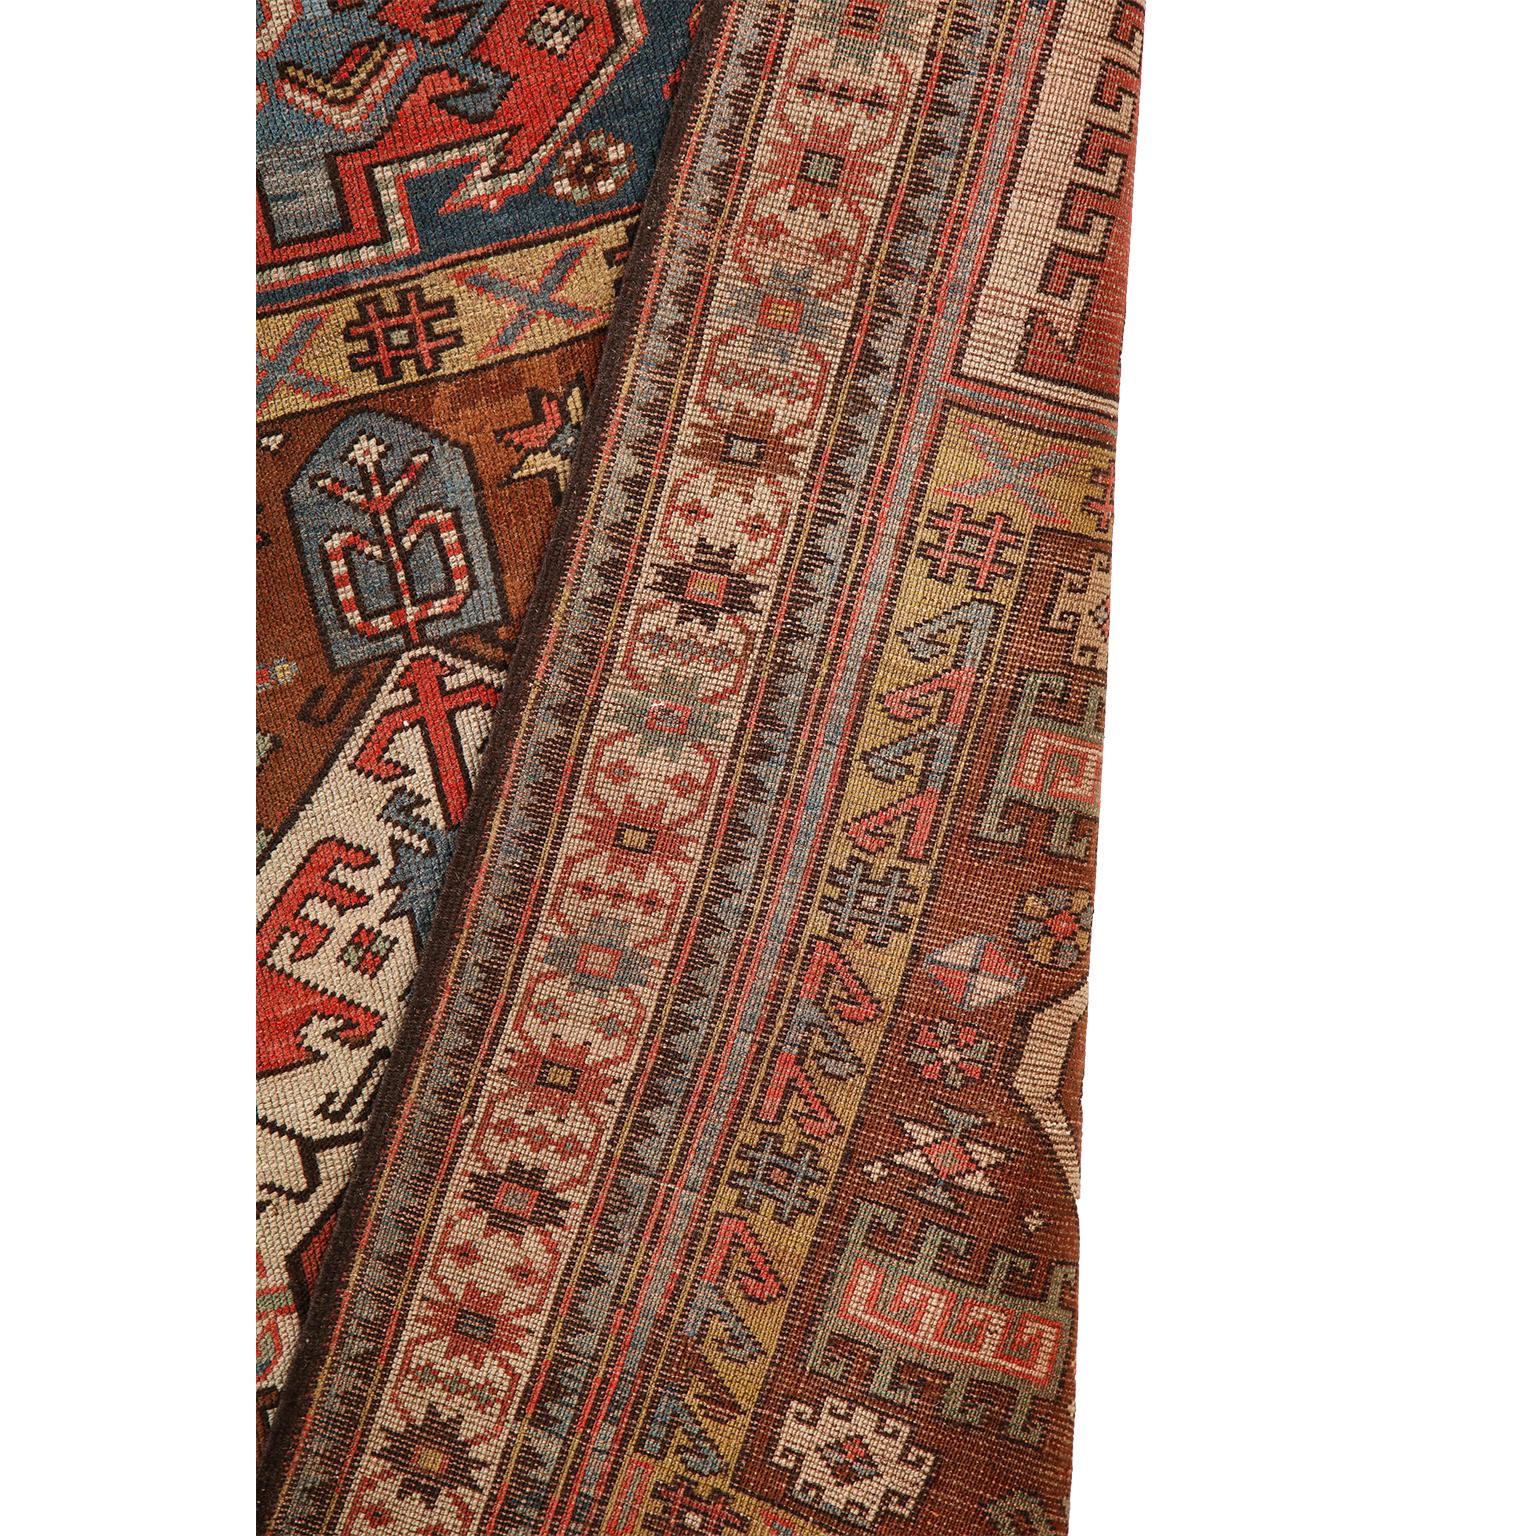 Antique 1880s Caucasian Rug, Hand-knotted Wool, Blue, Green, Red, 4' x 6' For Sale 7